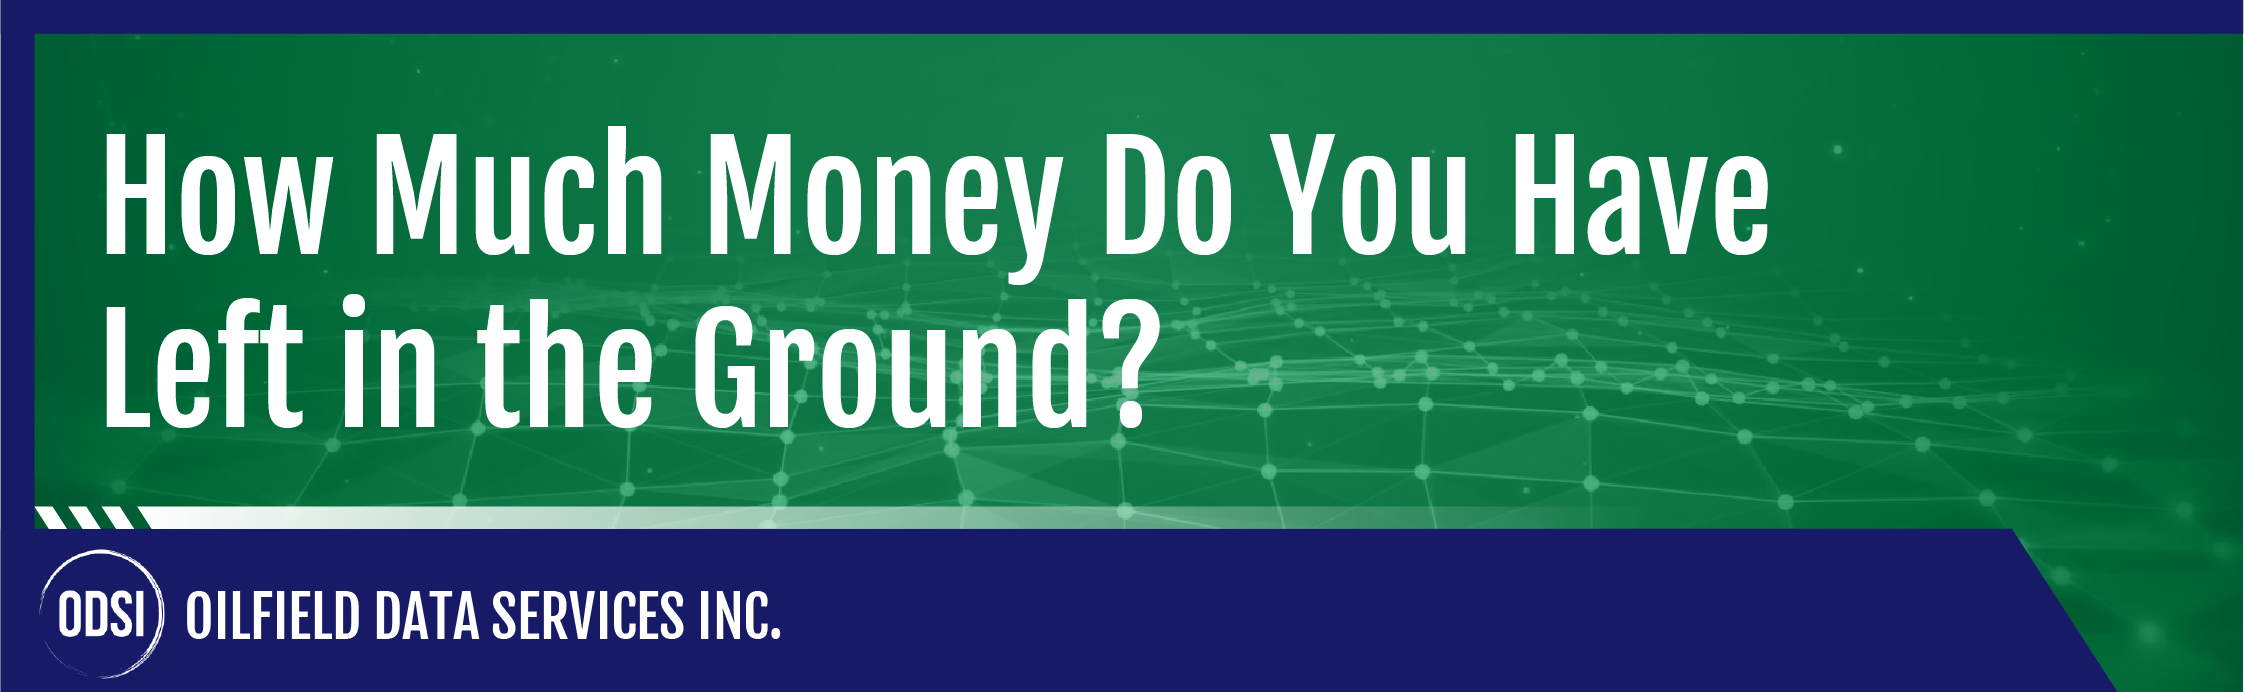 How Much Money Do You Have Left in the Ground?